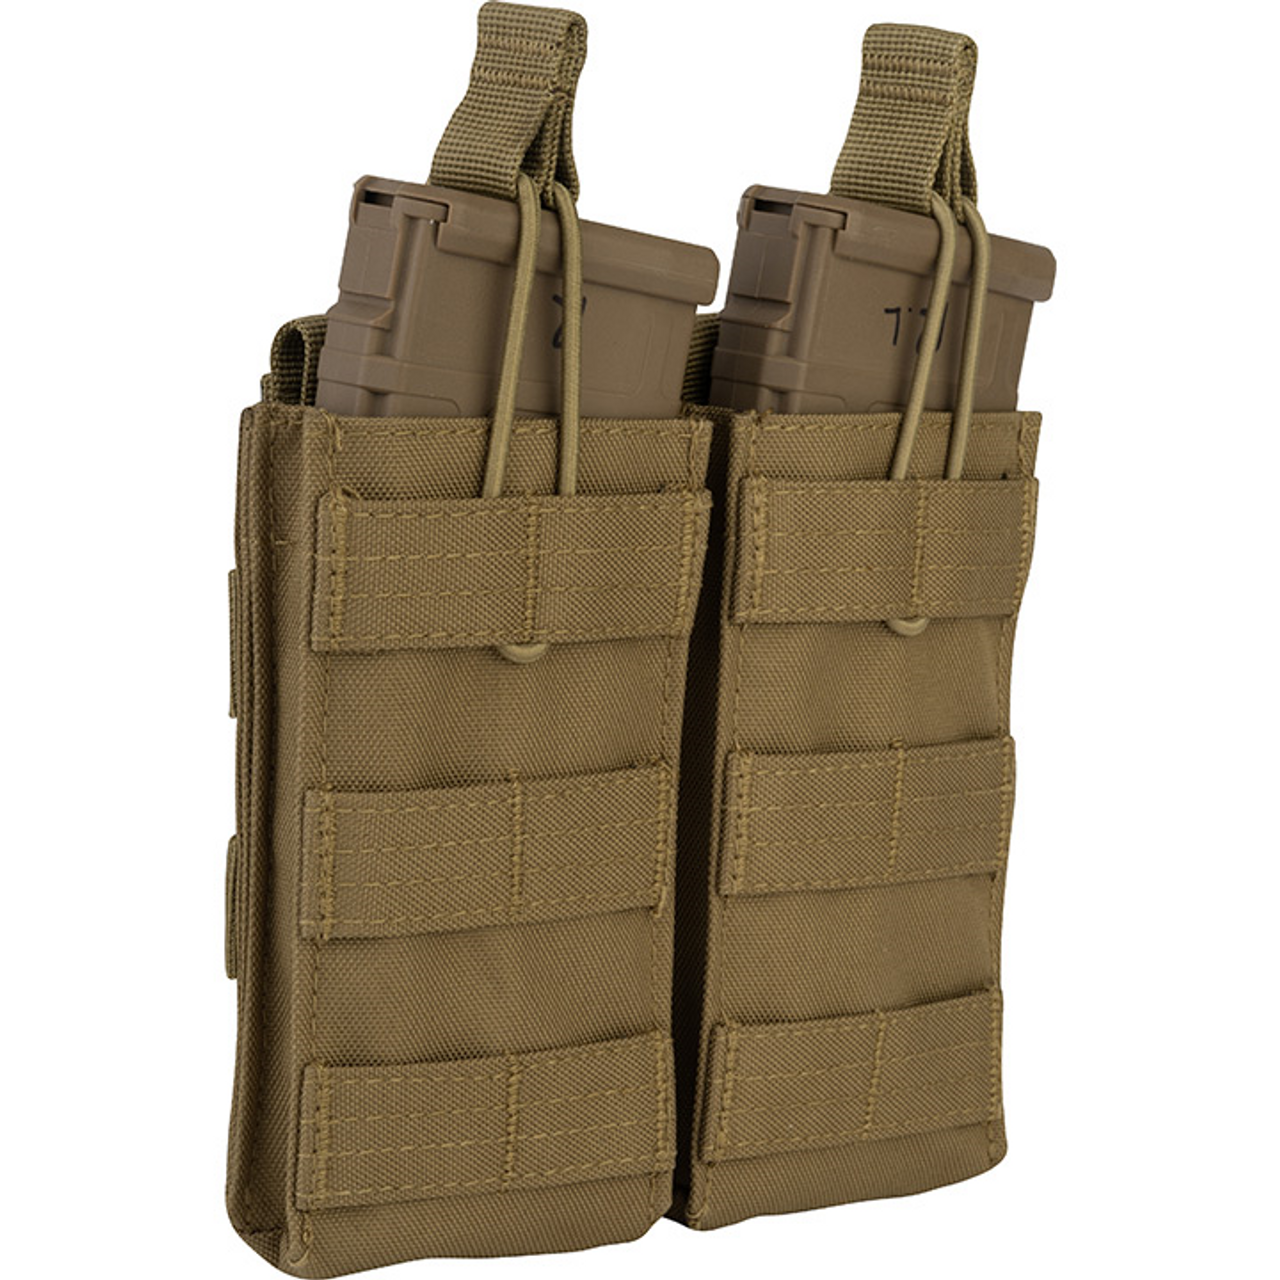 Viper Quick Release Double Mag Pouch - Coyote